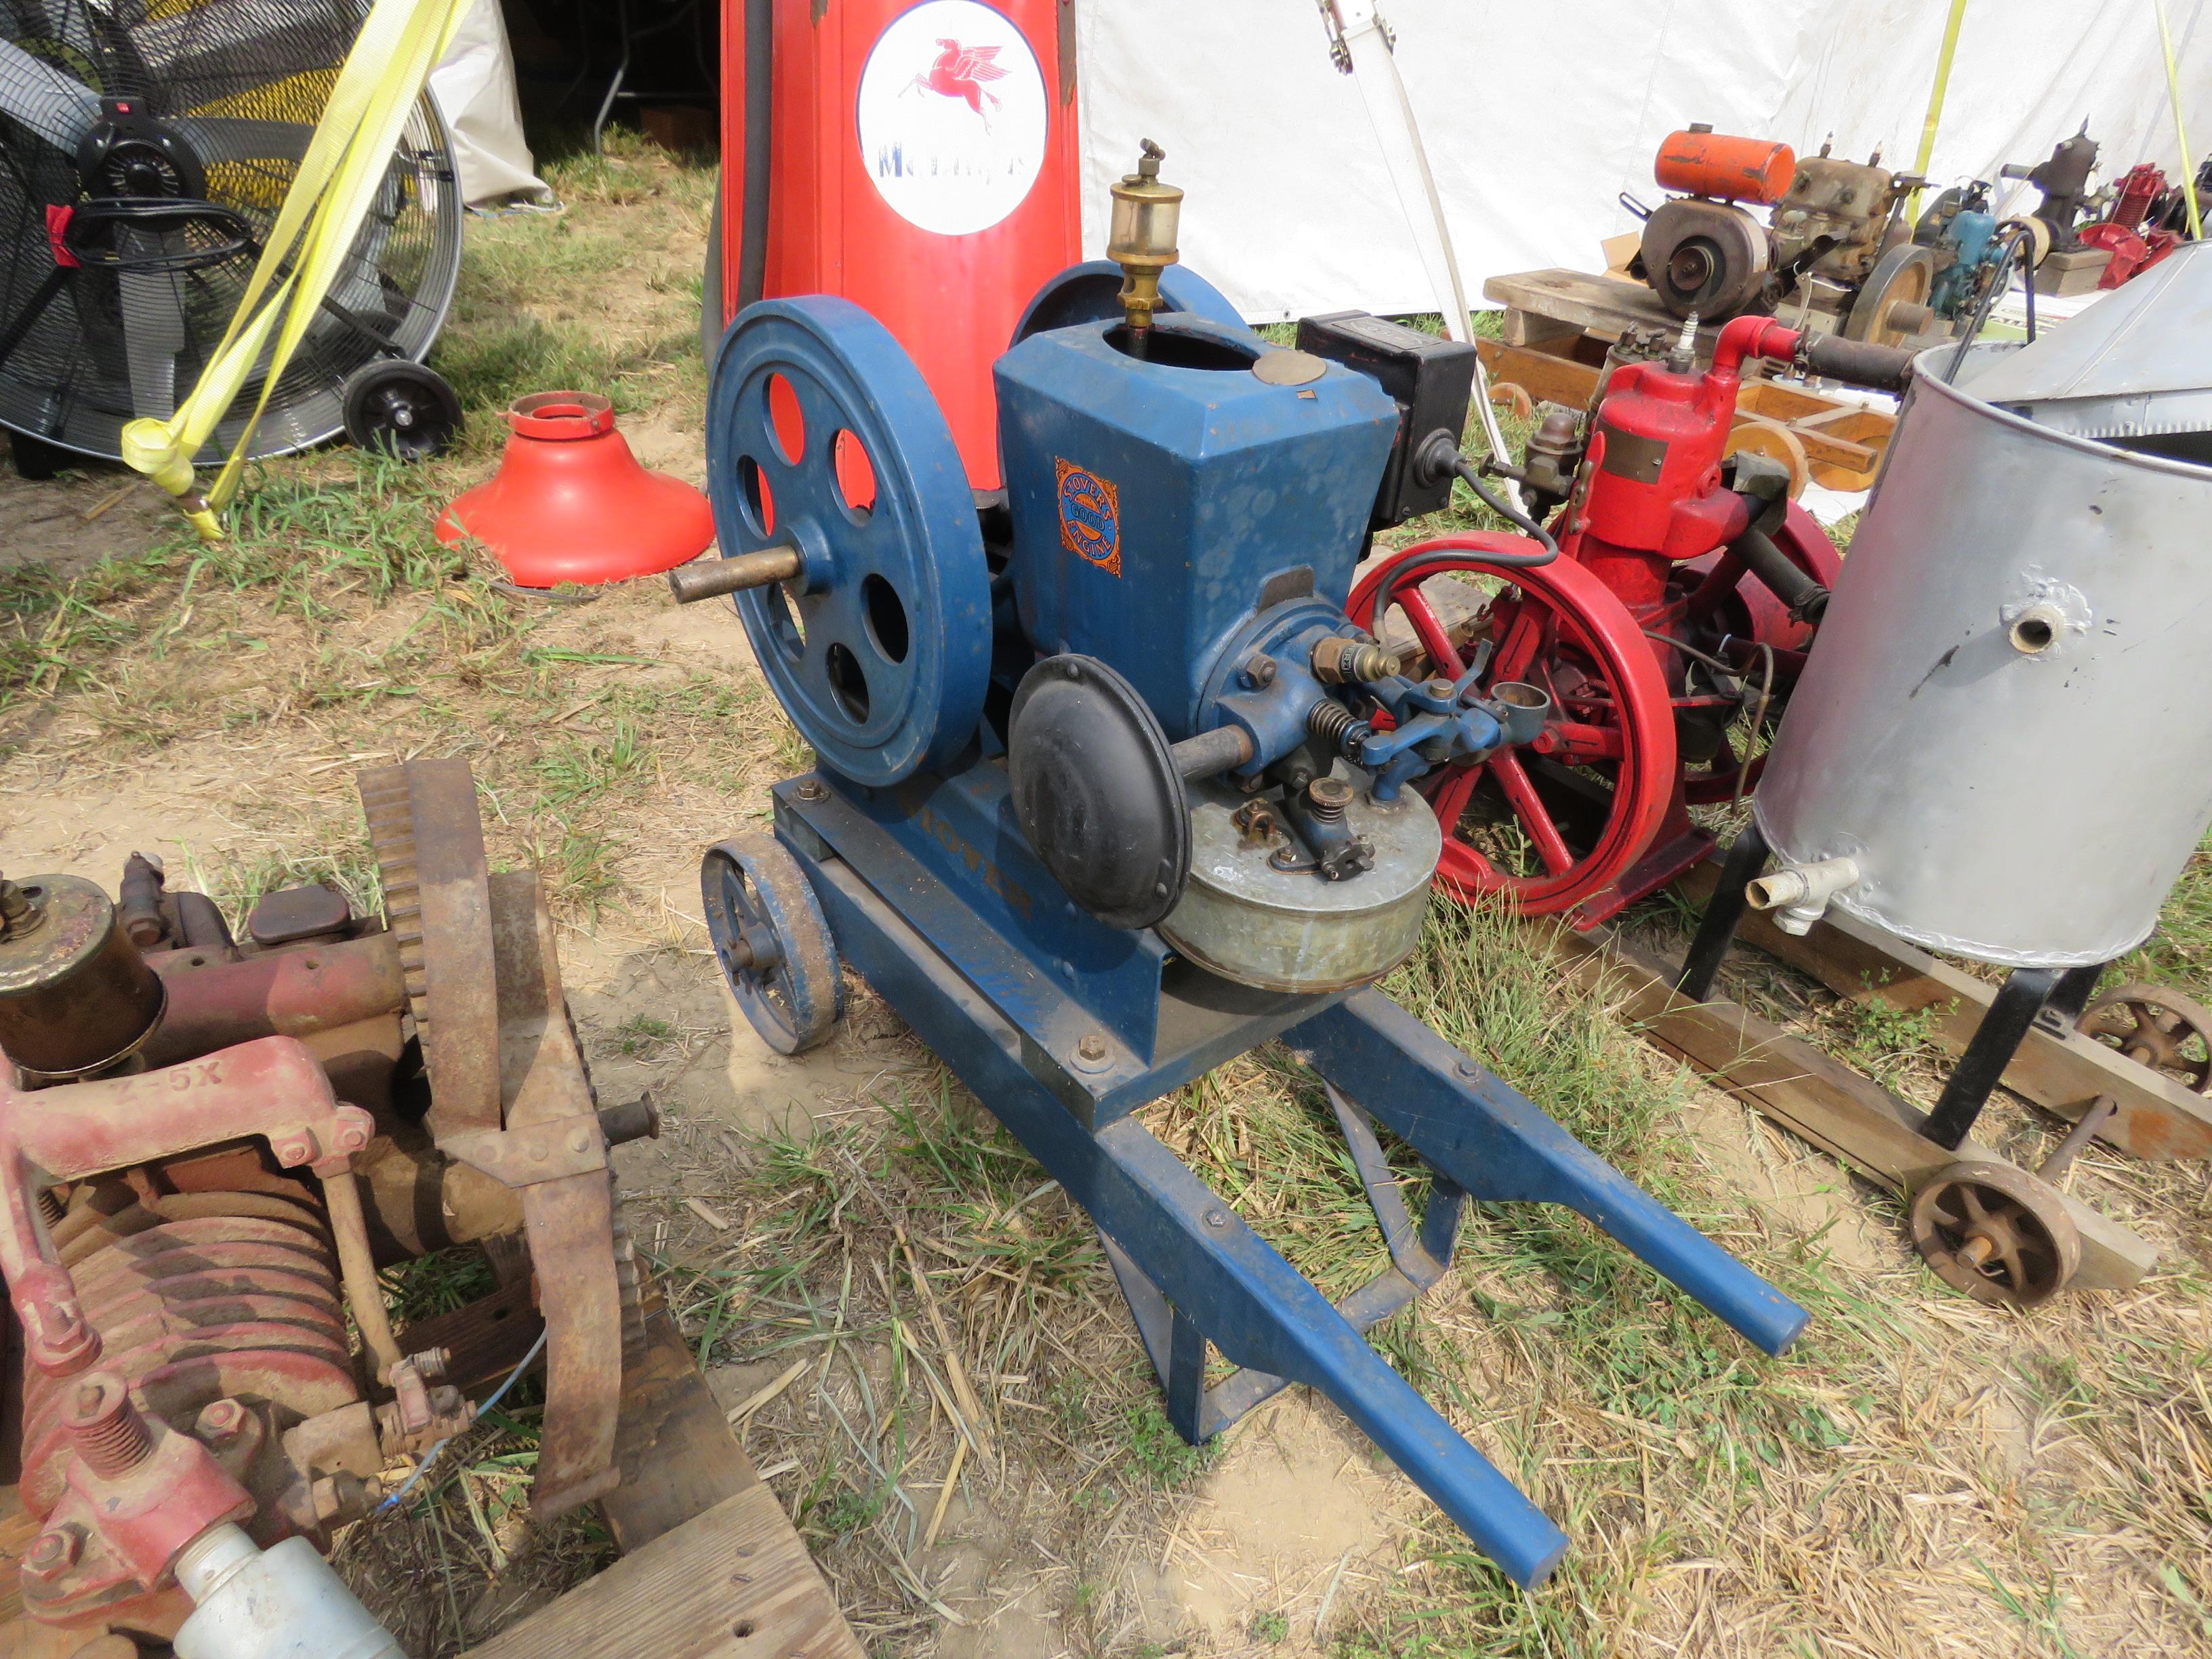 Stover 1 1/2hp "The Good Engine" stationary gas engine